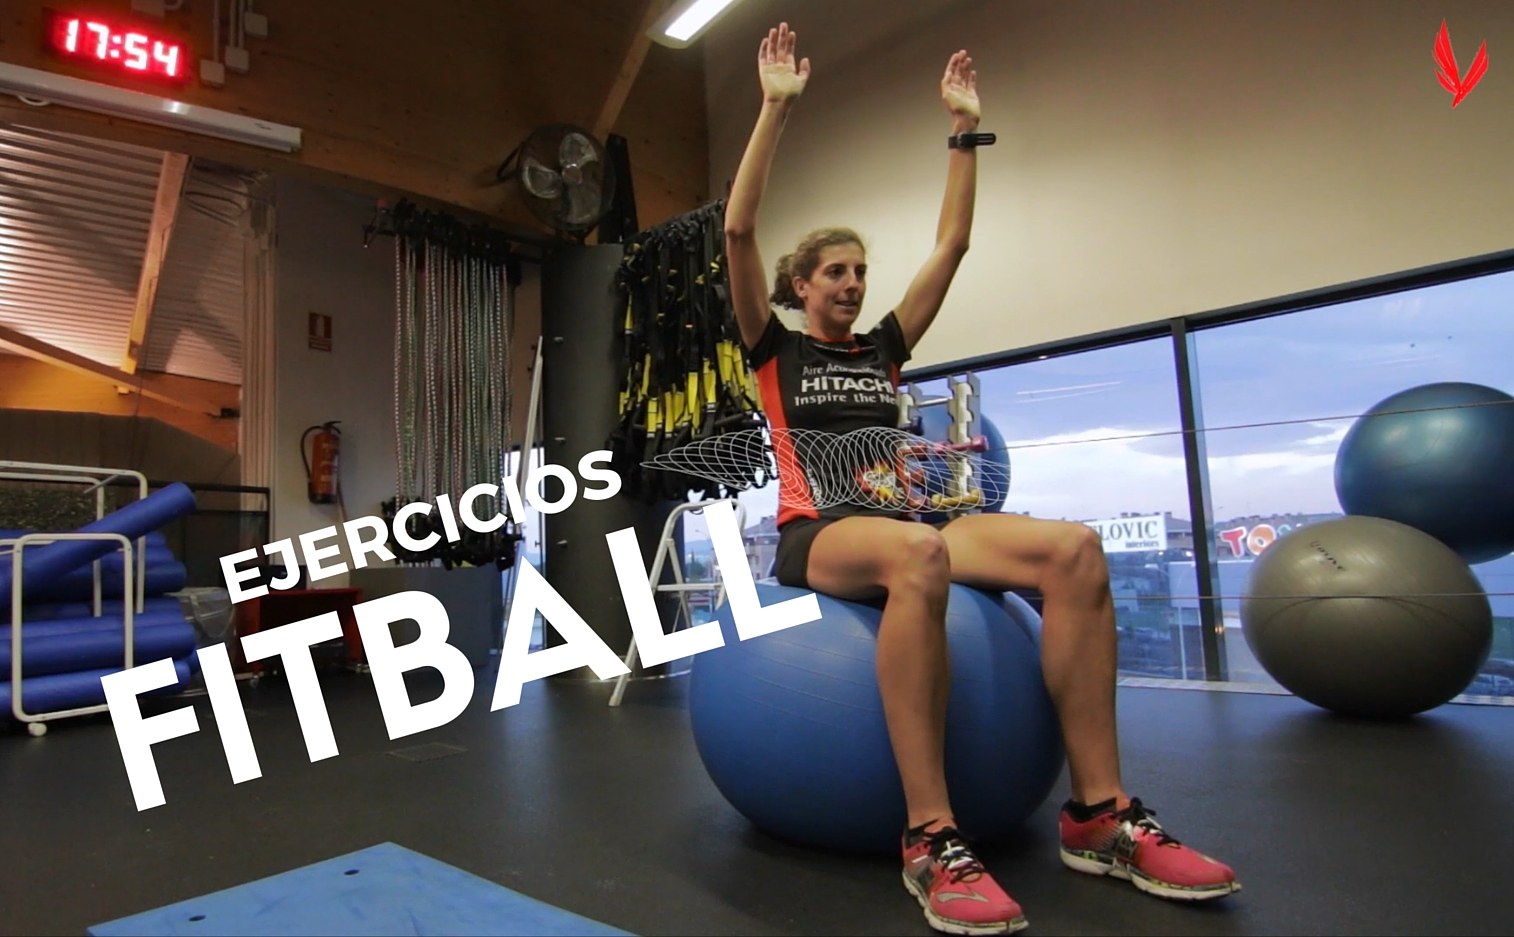 Ejercicios con fitball para runners